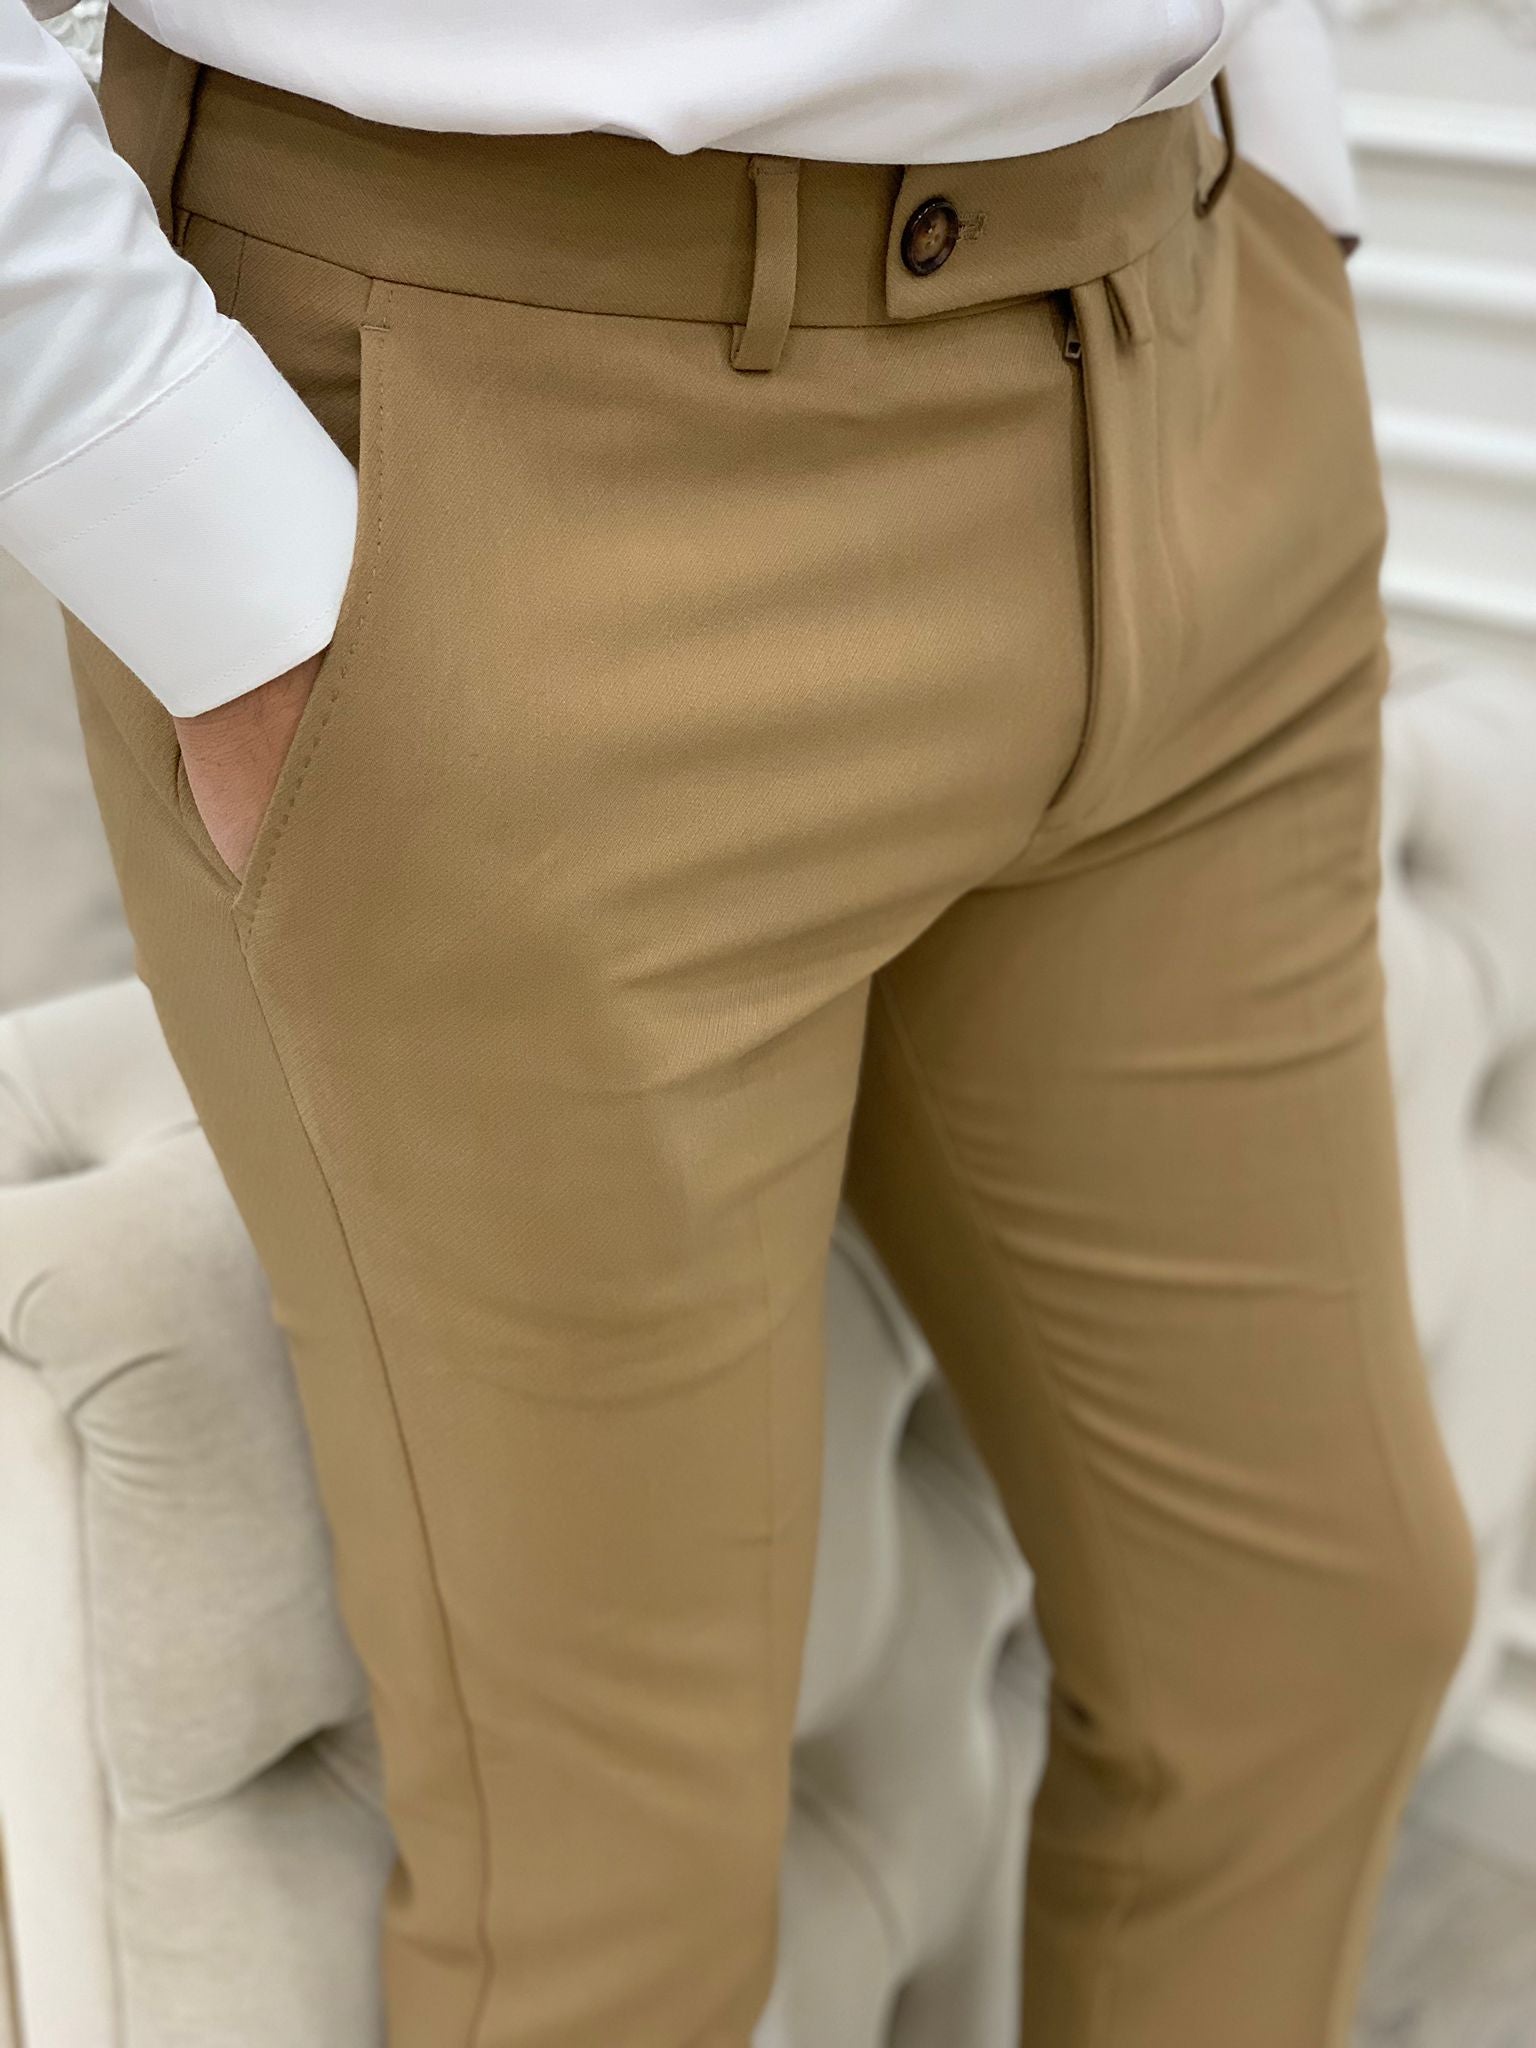 Buy Hipster Cream Trouser for Men at Amazon.in